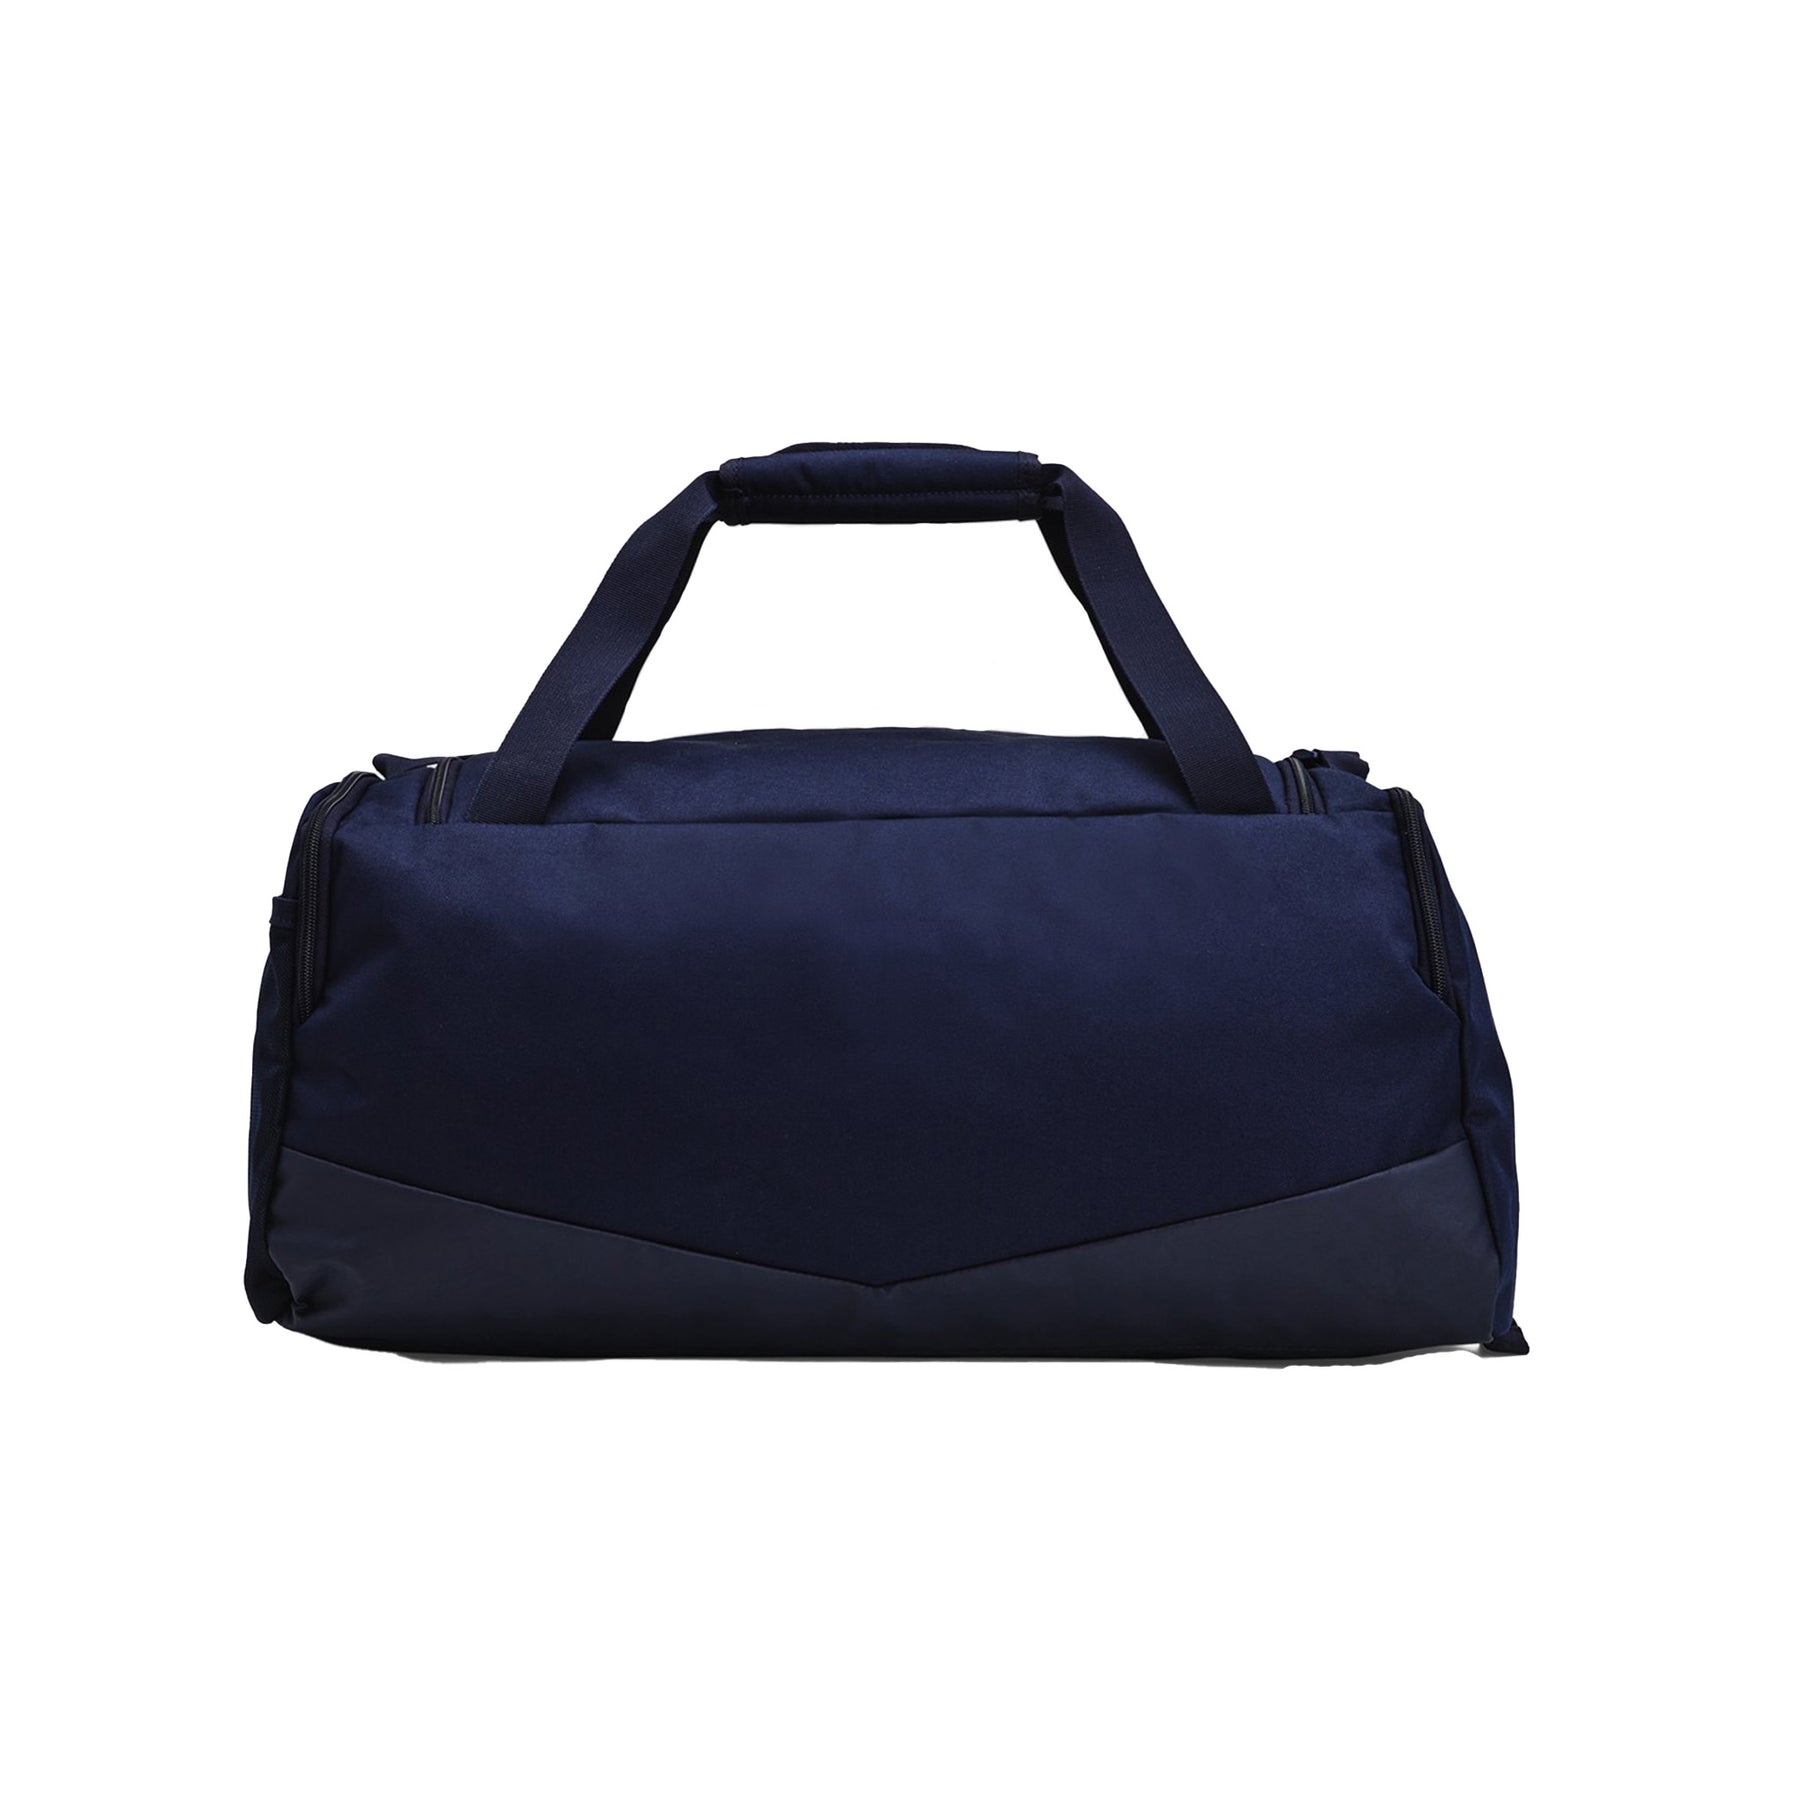 Under Armour Undeniable 5.0 Small Duffel Bag: Navy